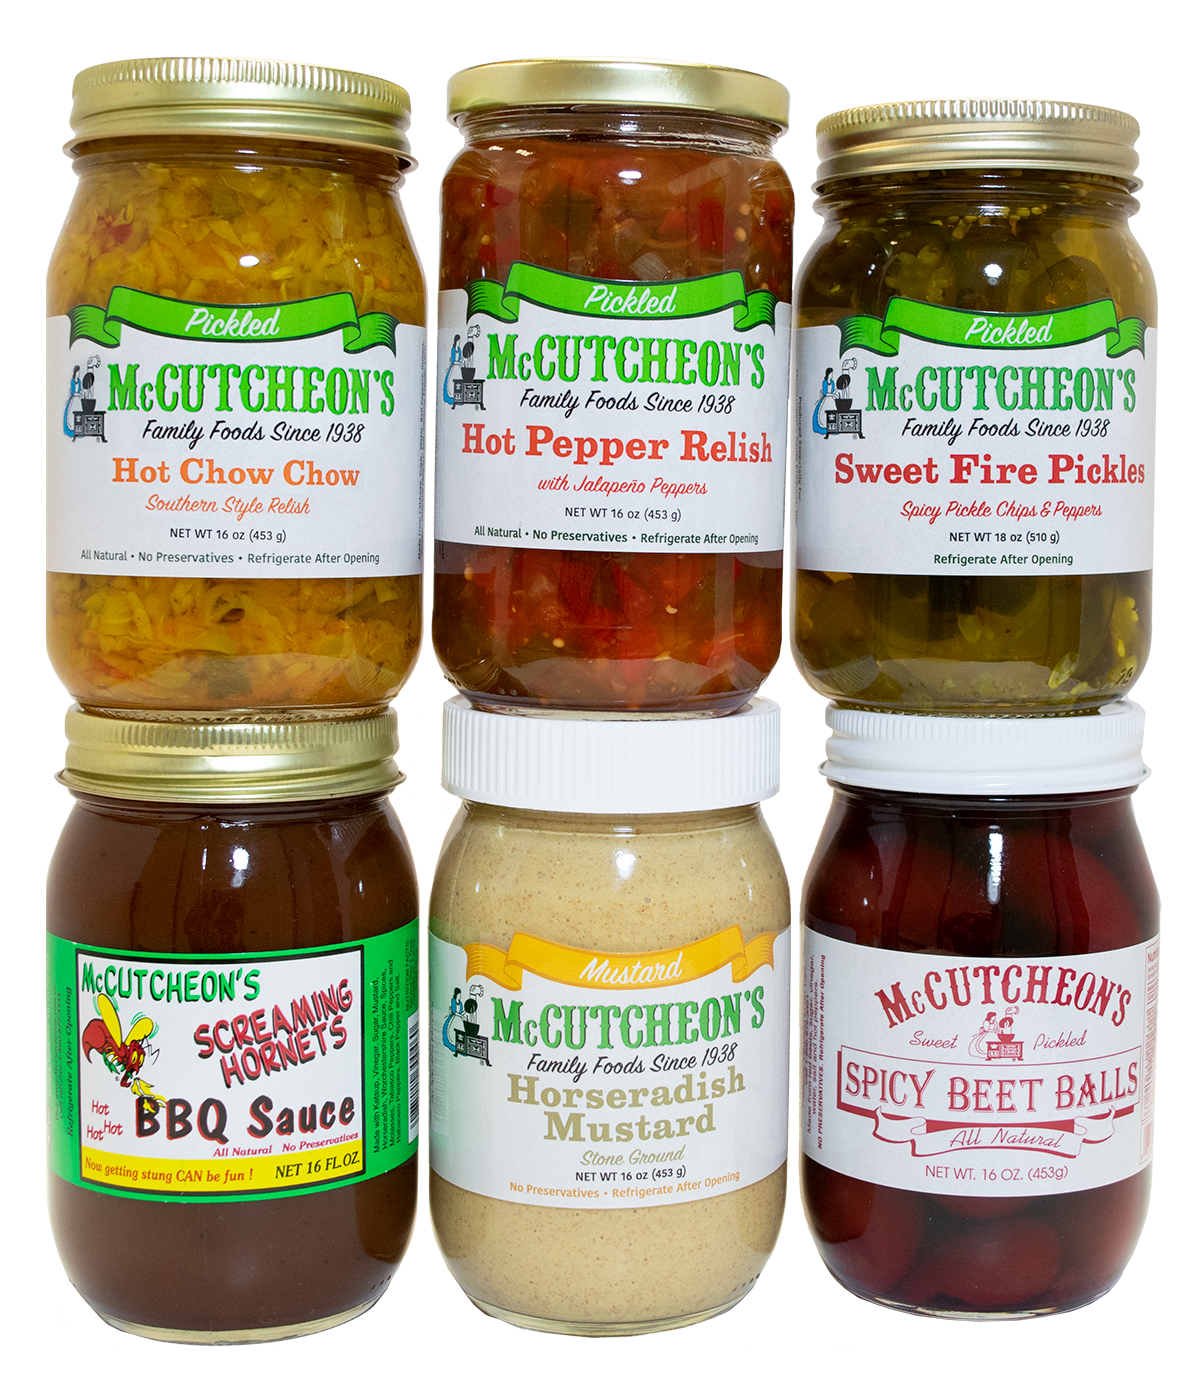 McCutcheon's spicy picnic sampler featuring jars of hot chow chow, hot pepper relish, sweet fire pickles, screaming hornets bbq sauce, horseradish mustard, and spicy beet balls